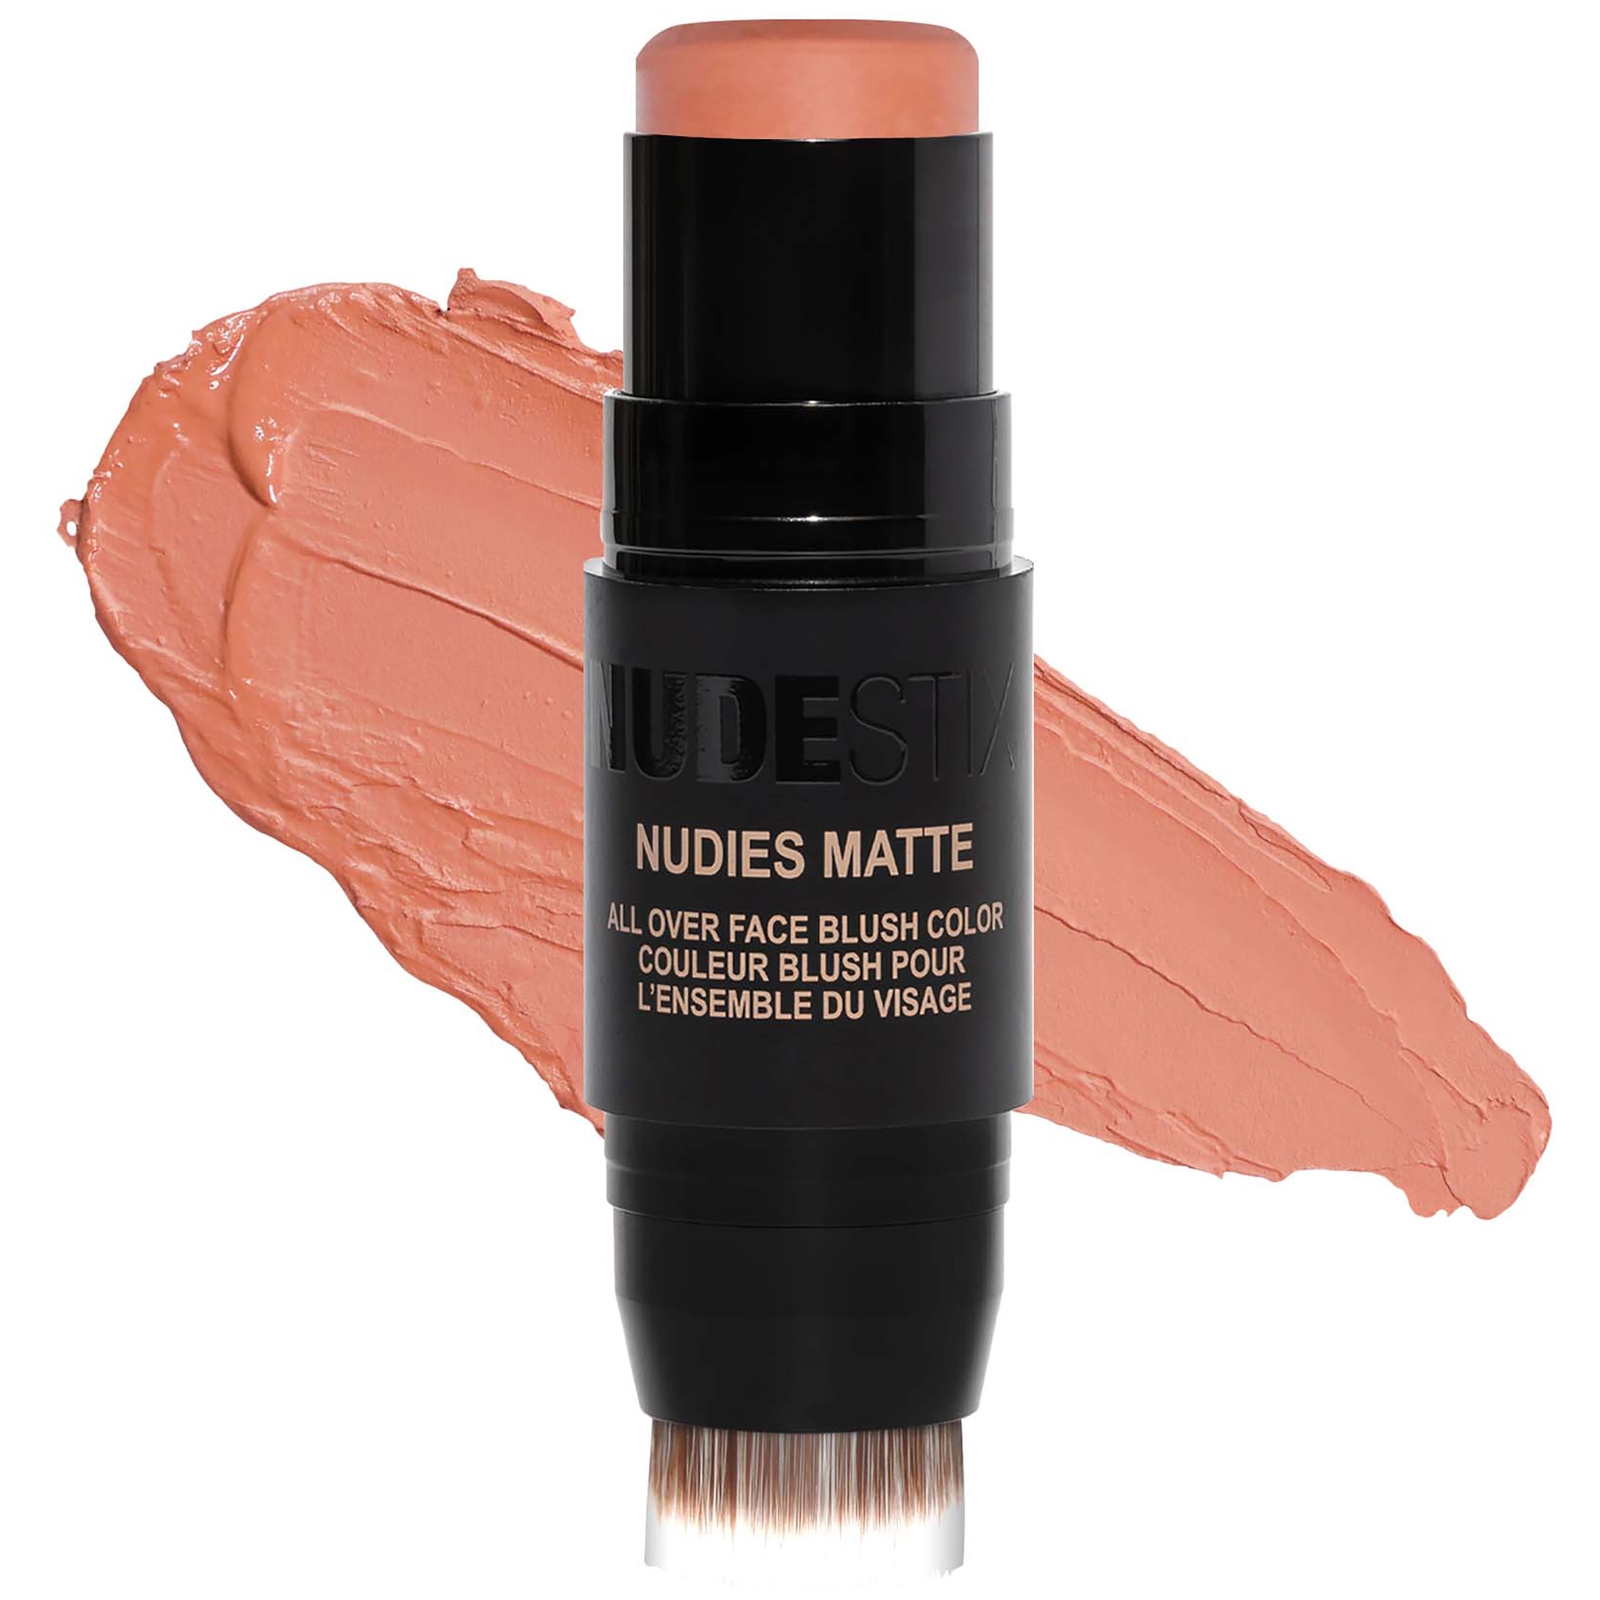 Image of NUDESTIX Nudies Matte All Over Face Blush Colour 7g (Various Shades) - In the Nude